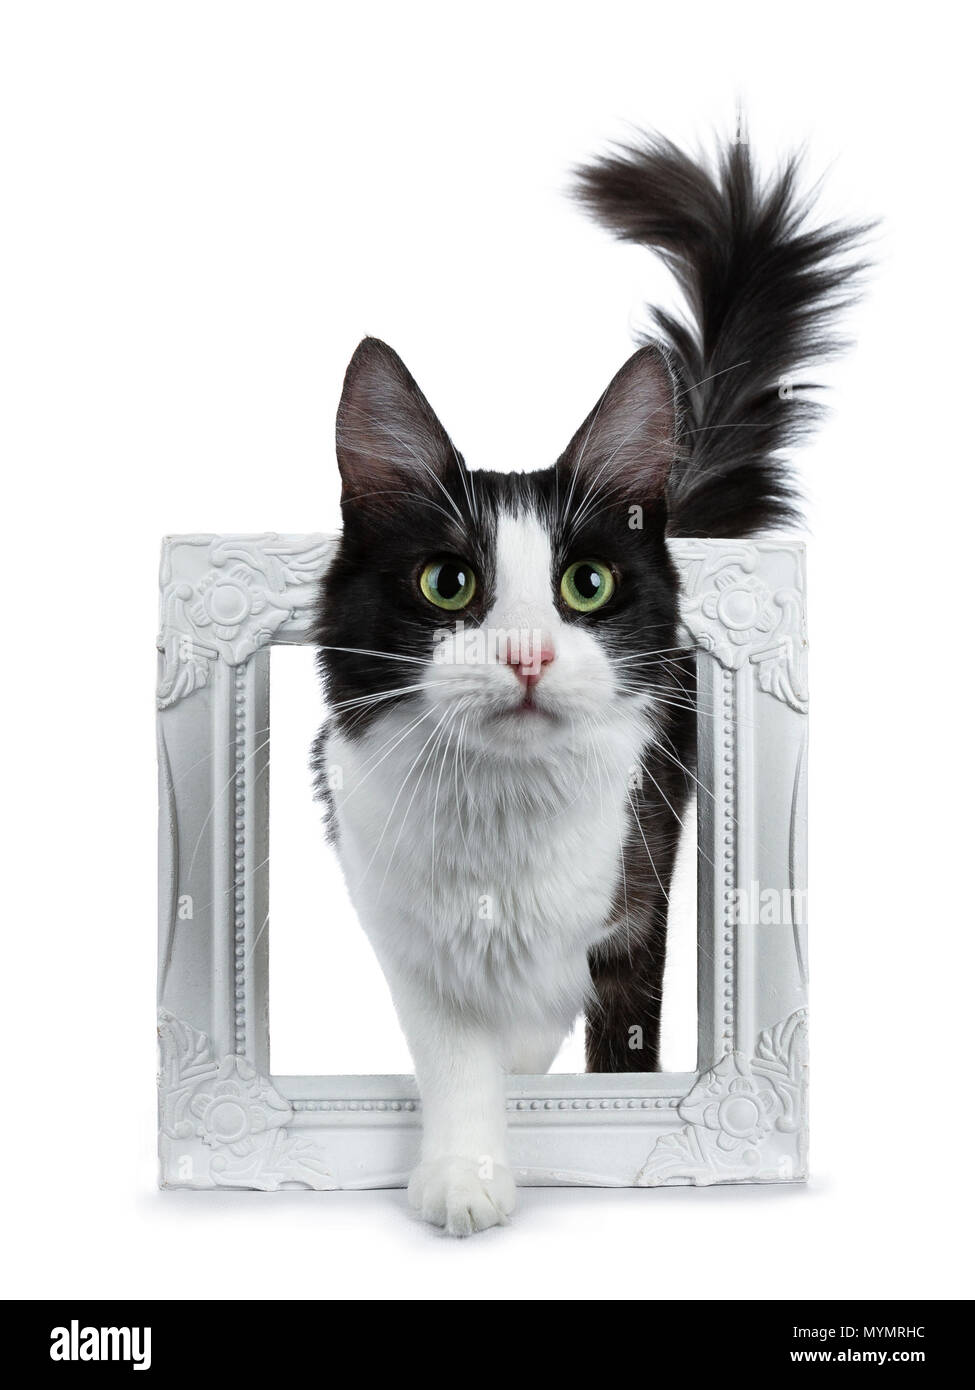 Cute black smoke with white Turkish Angora cat standing in white photo frame on white background with tail in the air Stock Photo